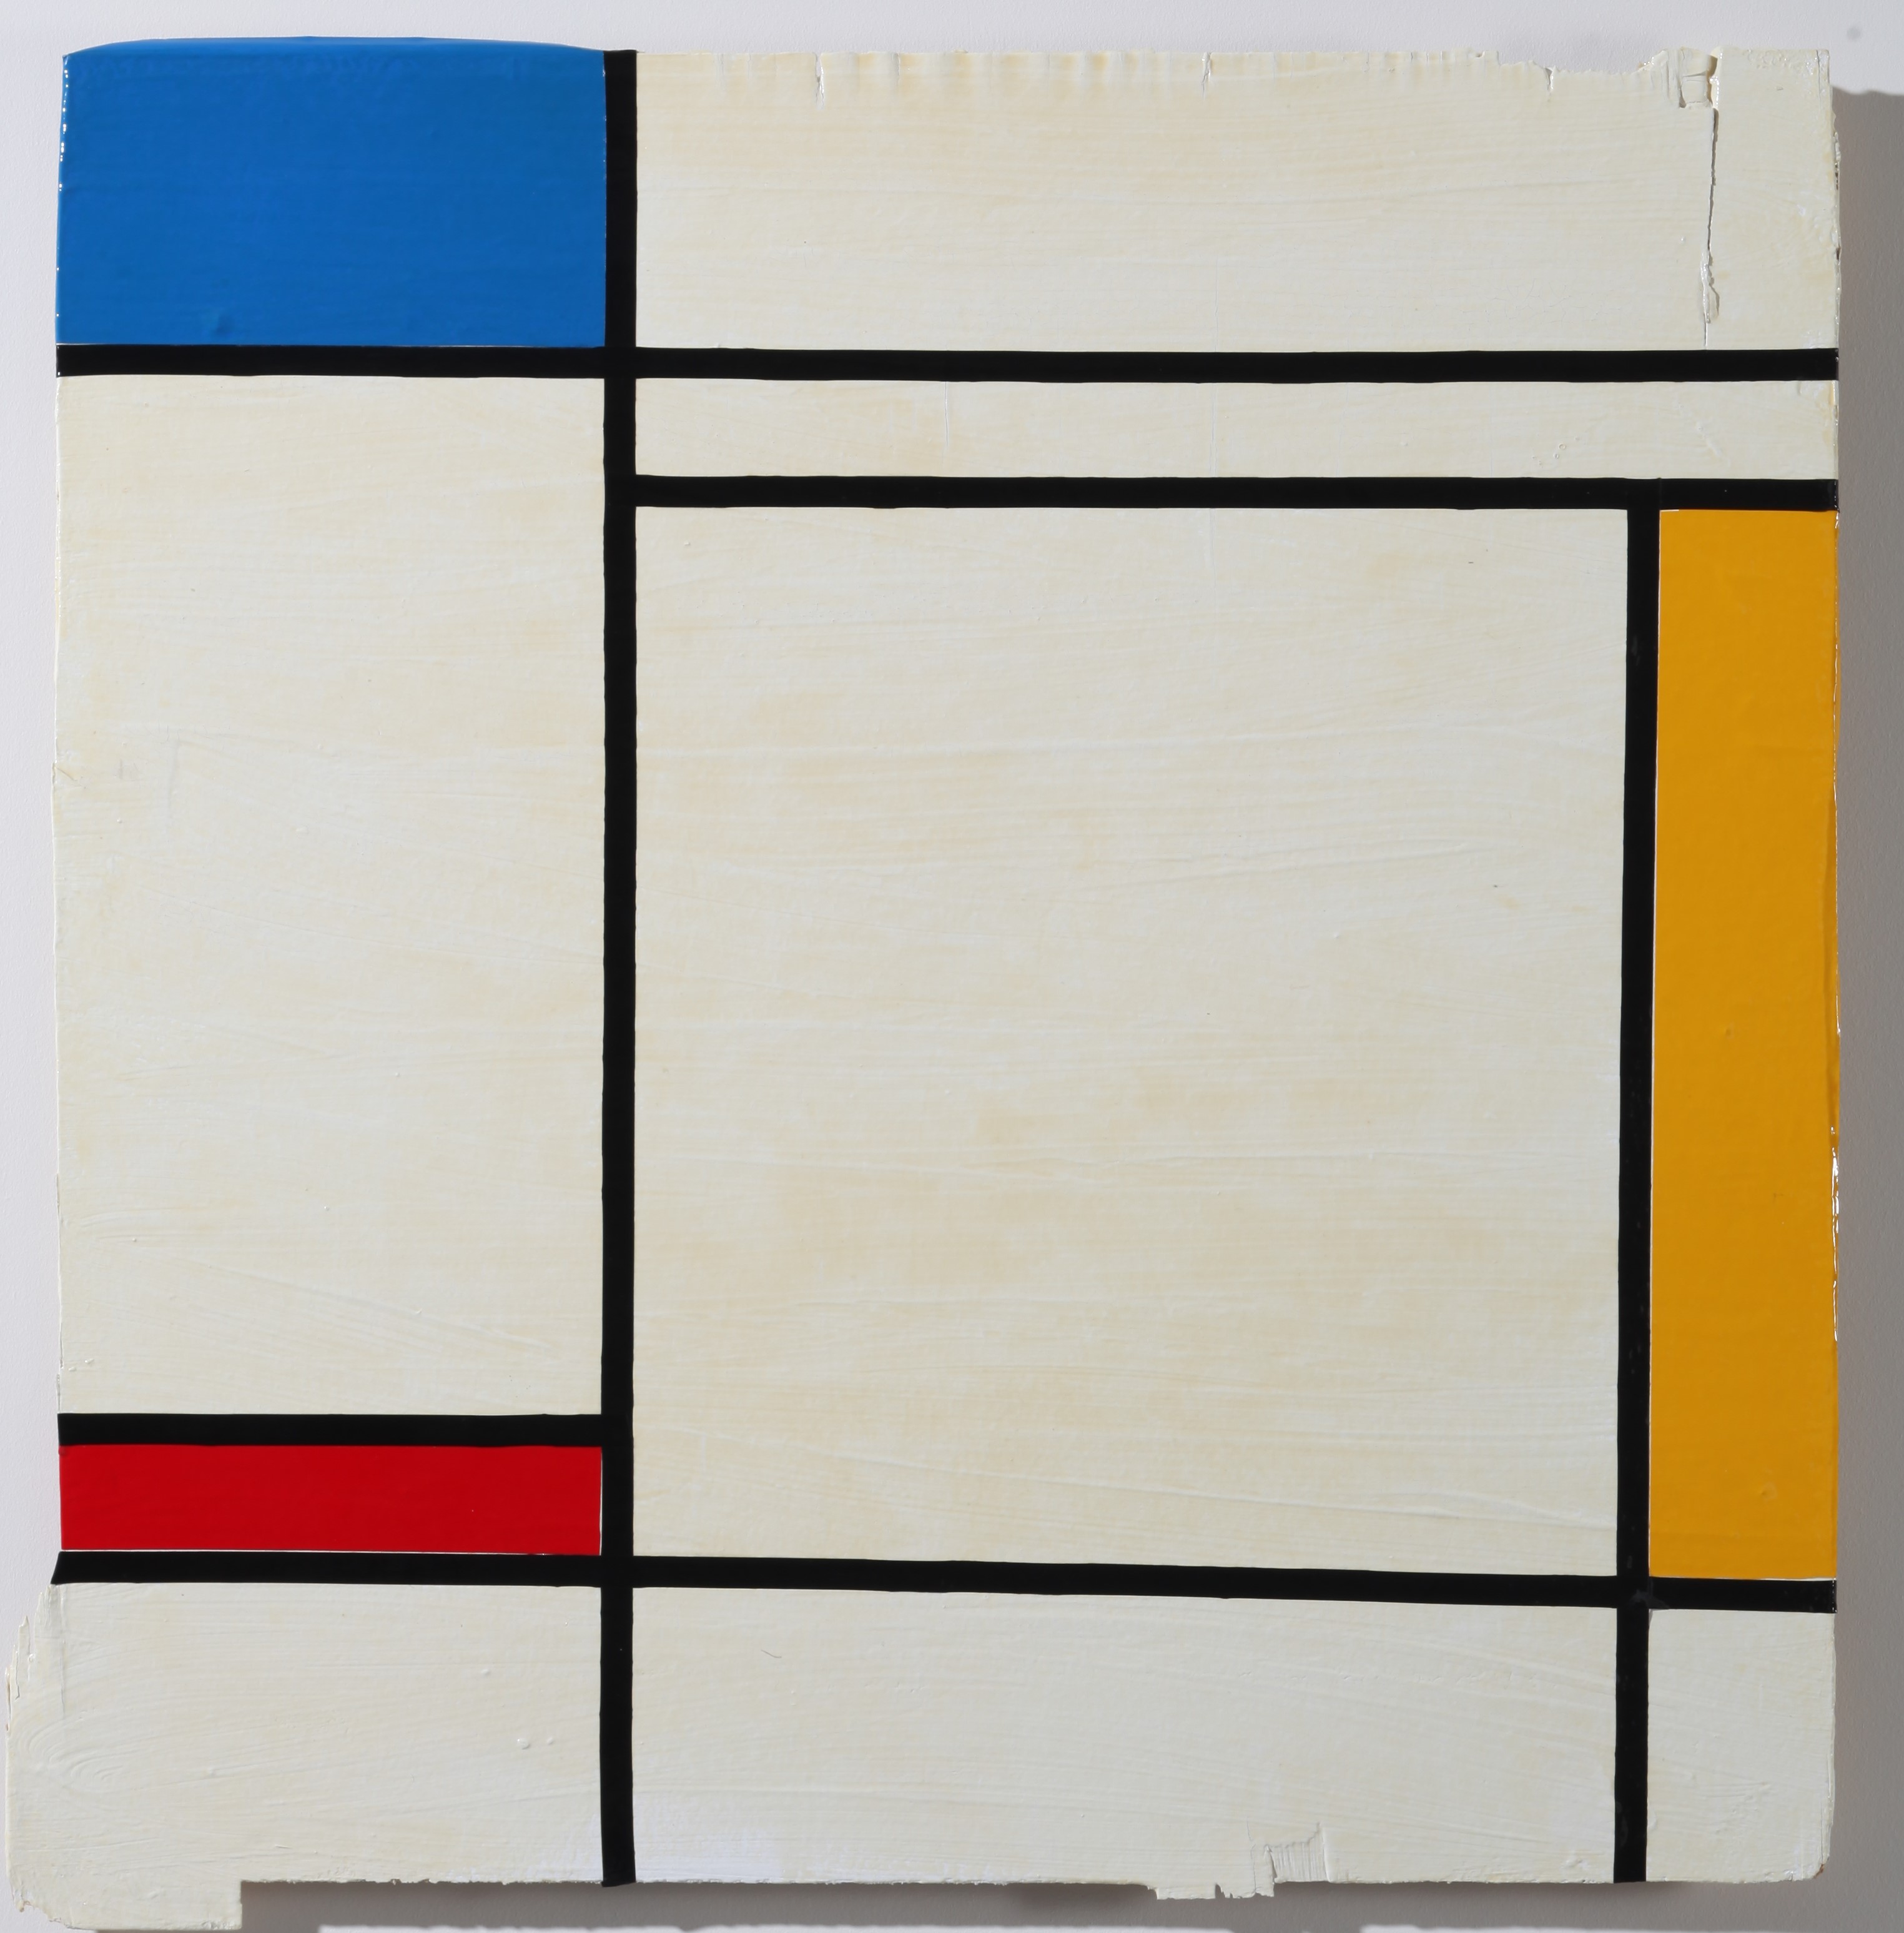 Re-Inventing Piet. Mondrian and the Consequences - Kunstmuseum Wolfsburg